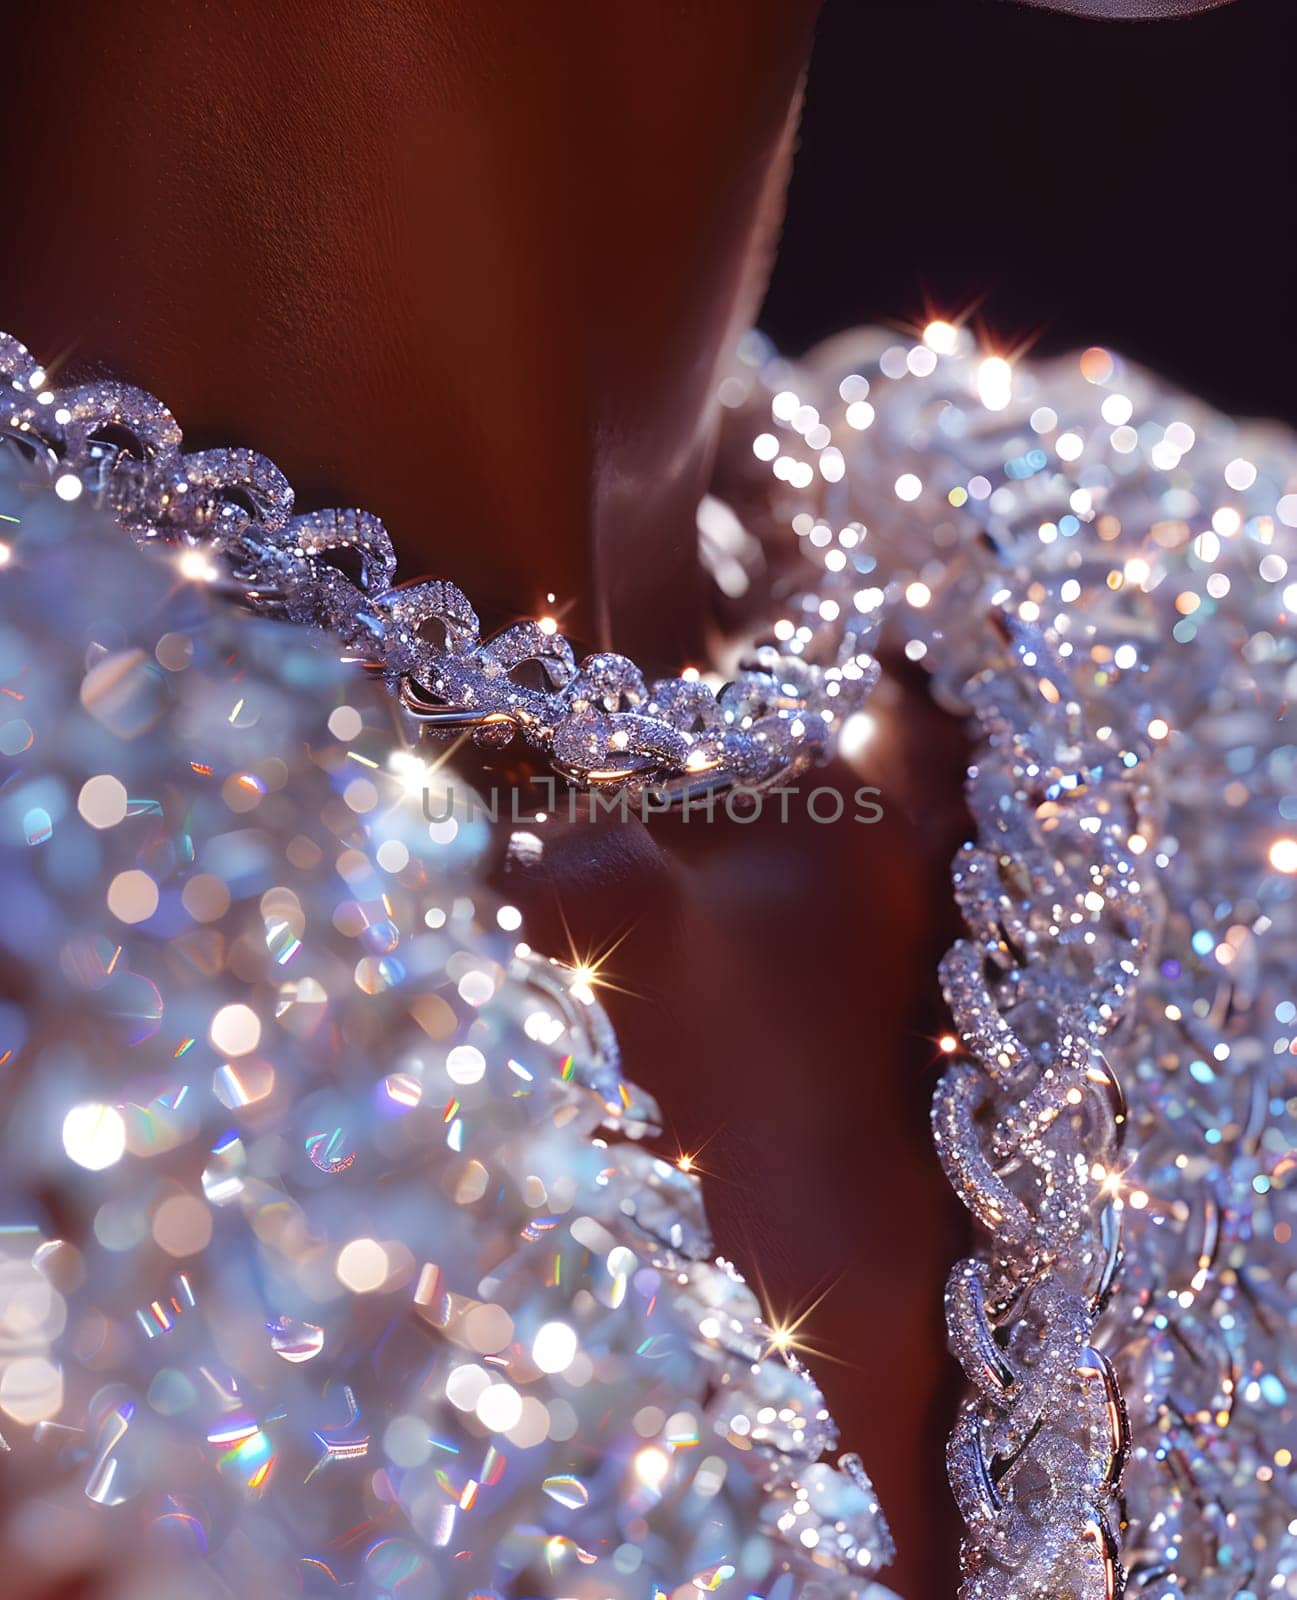 Closeup of a woman with a diamond necklace under electric blue dew drops by Nadtochiy